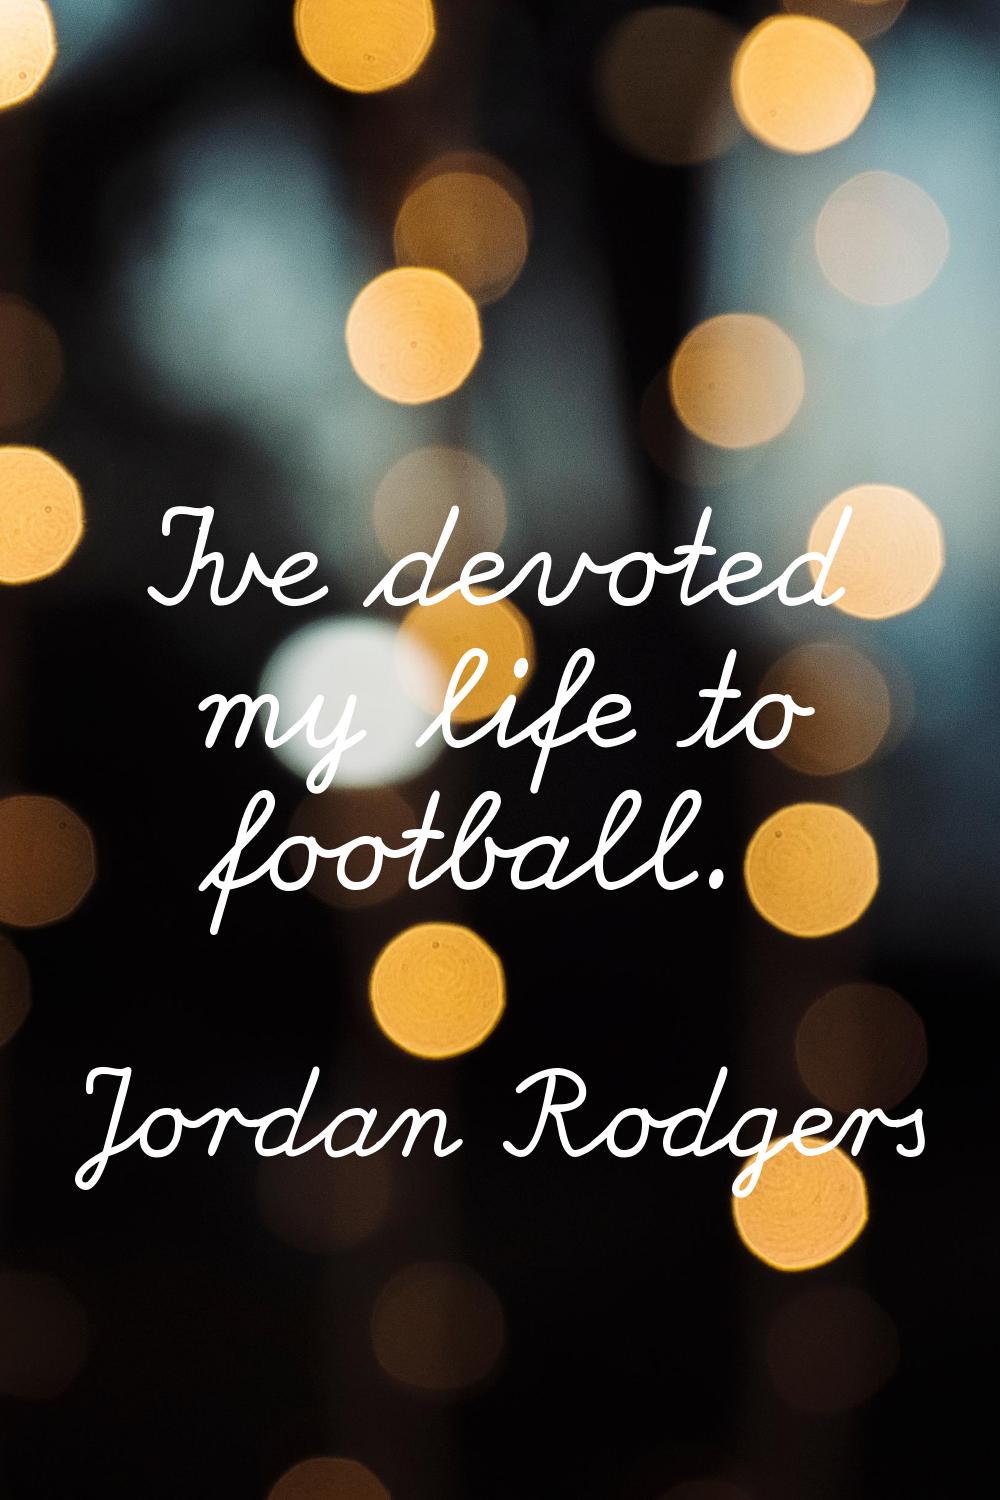 I've devoted my life to football.